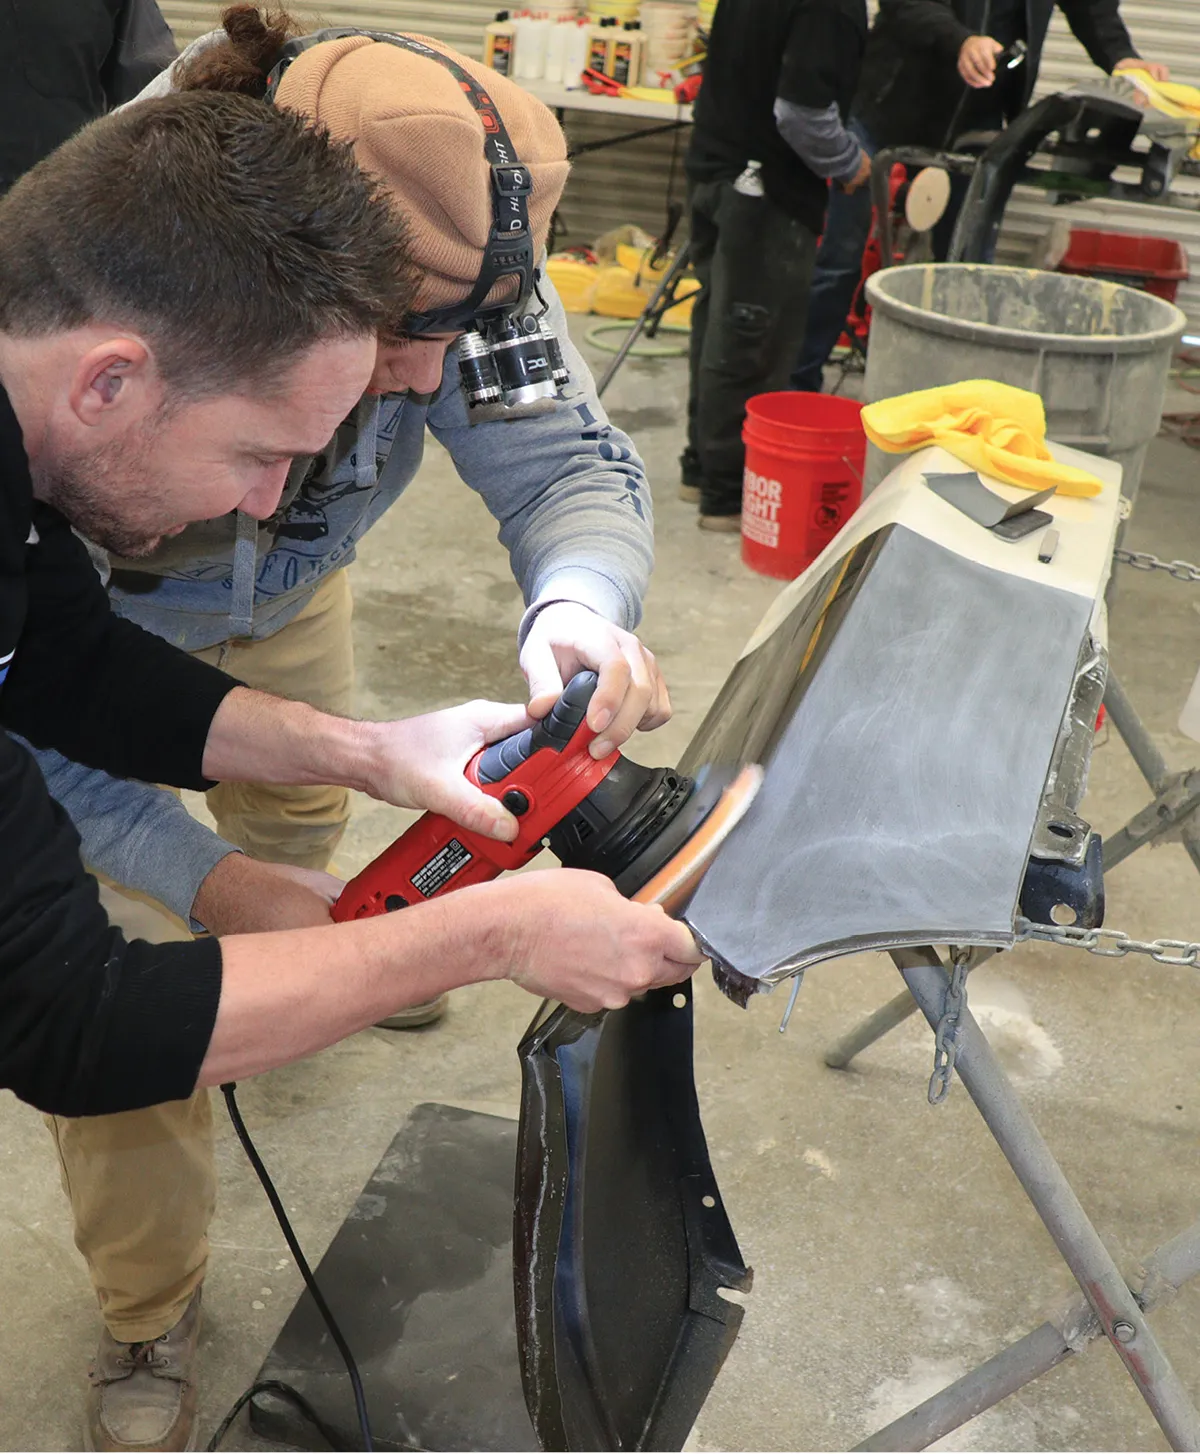 Teaching with a hands-on approach, Jason Killmer instructs the flat angle and amount of compound that must be used to not burn the paint.